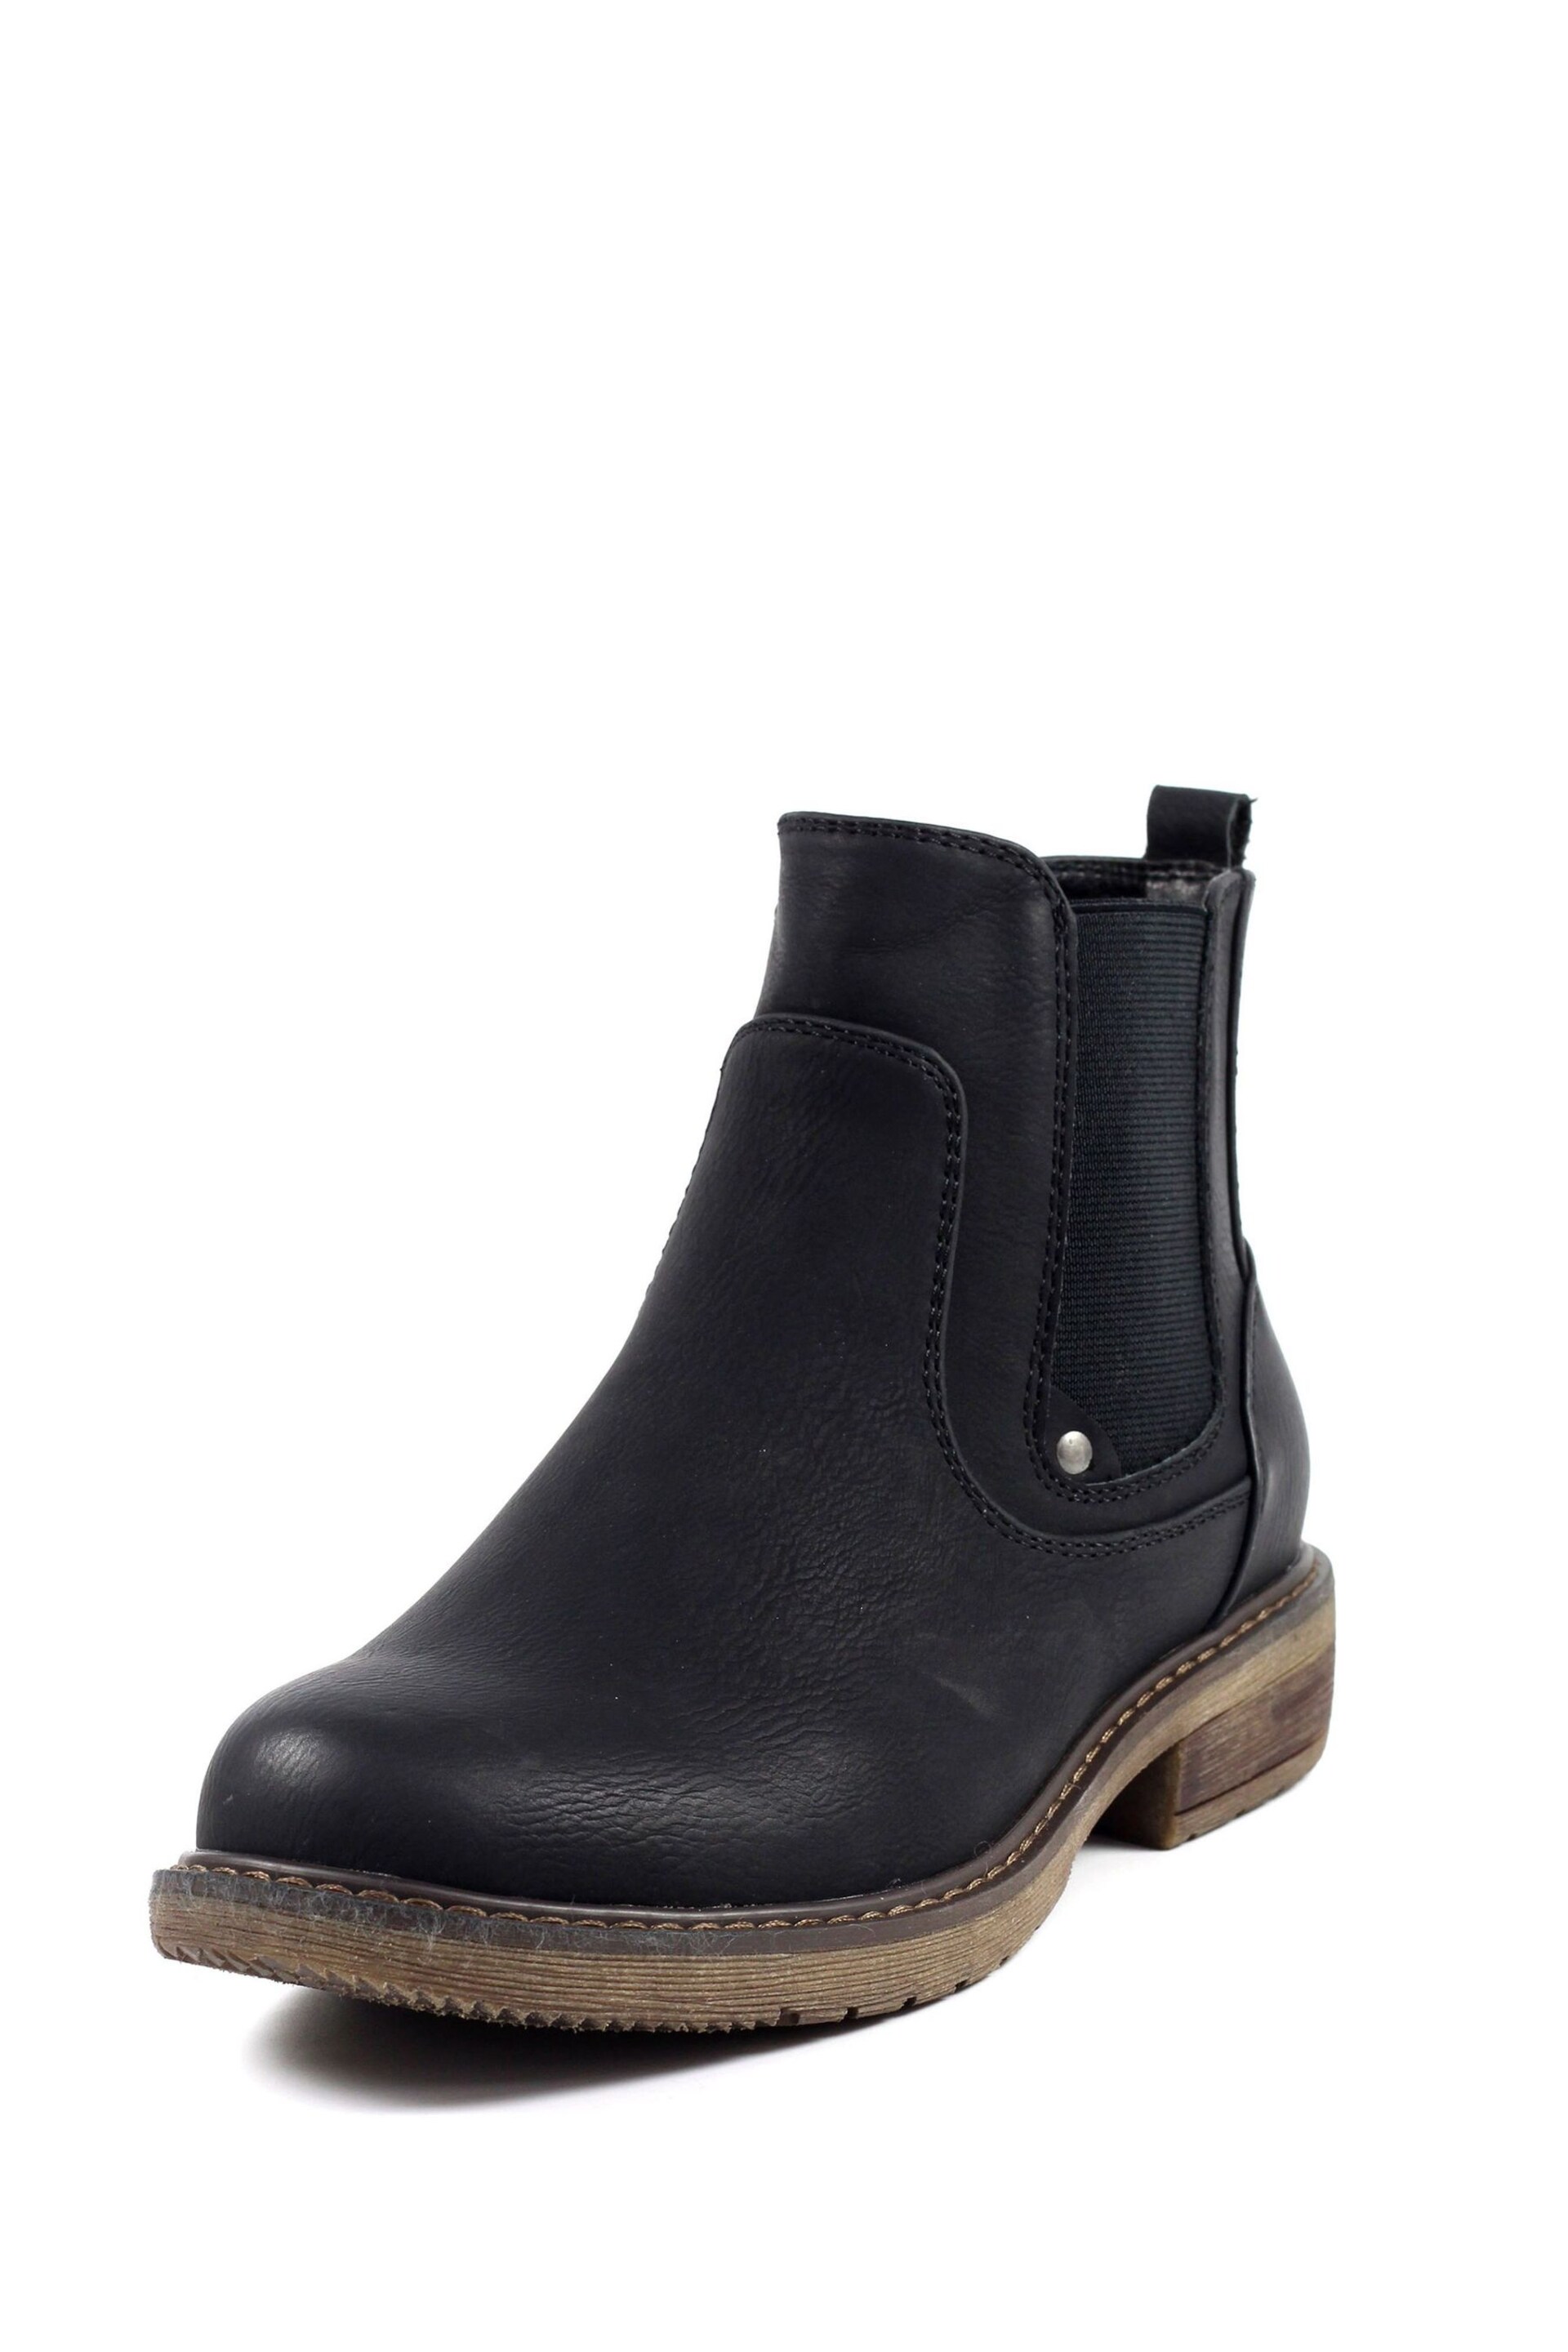 Lunar Roxie II Black Ankle Boots - Image 3 of 8